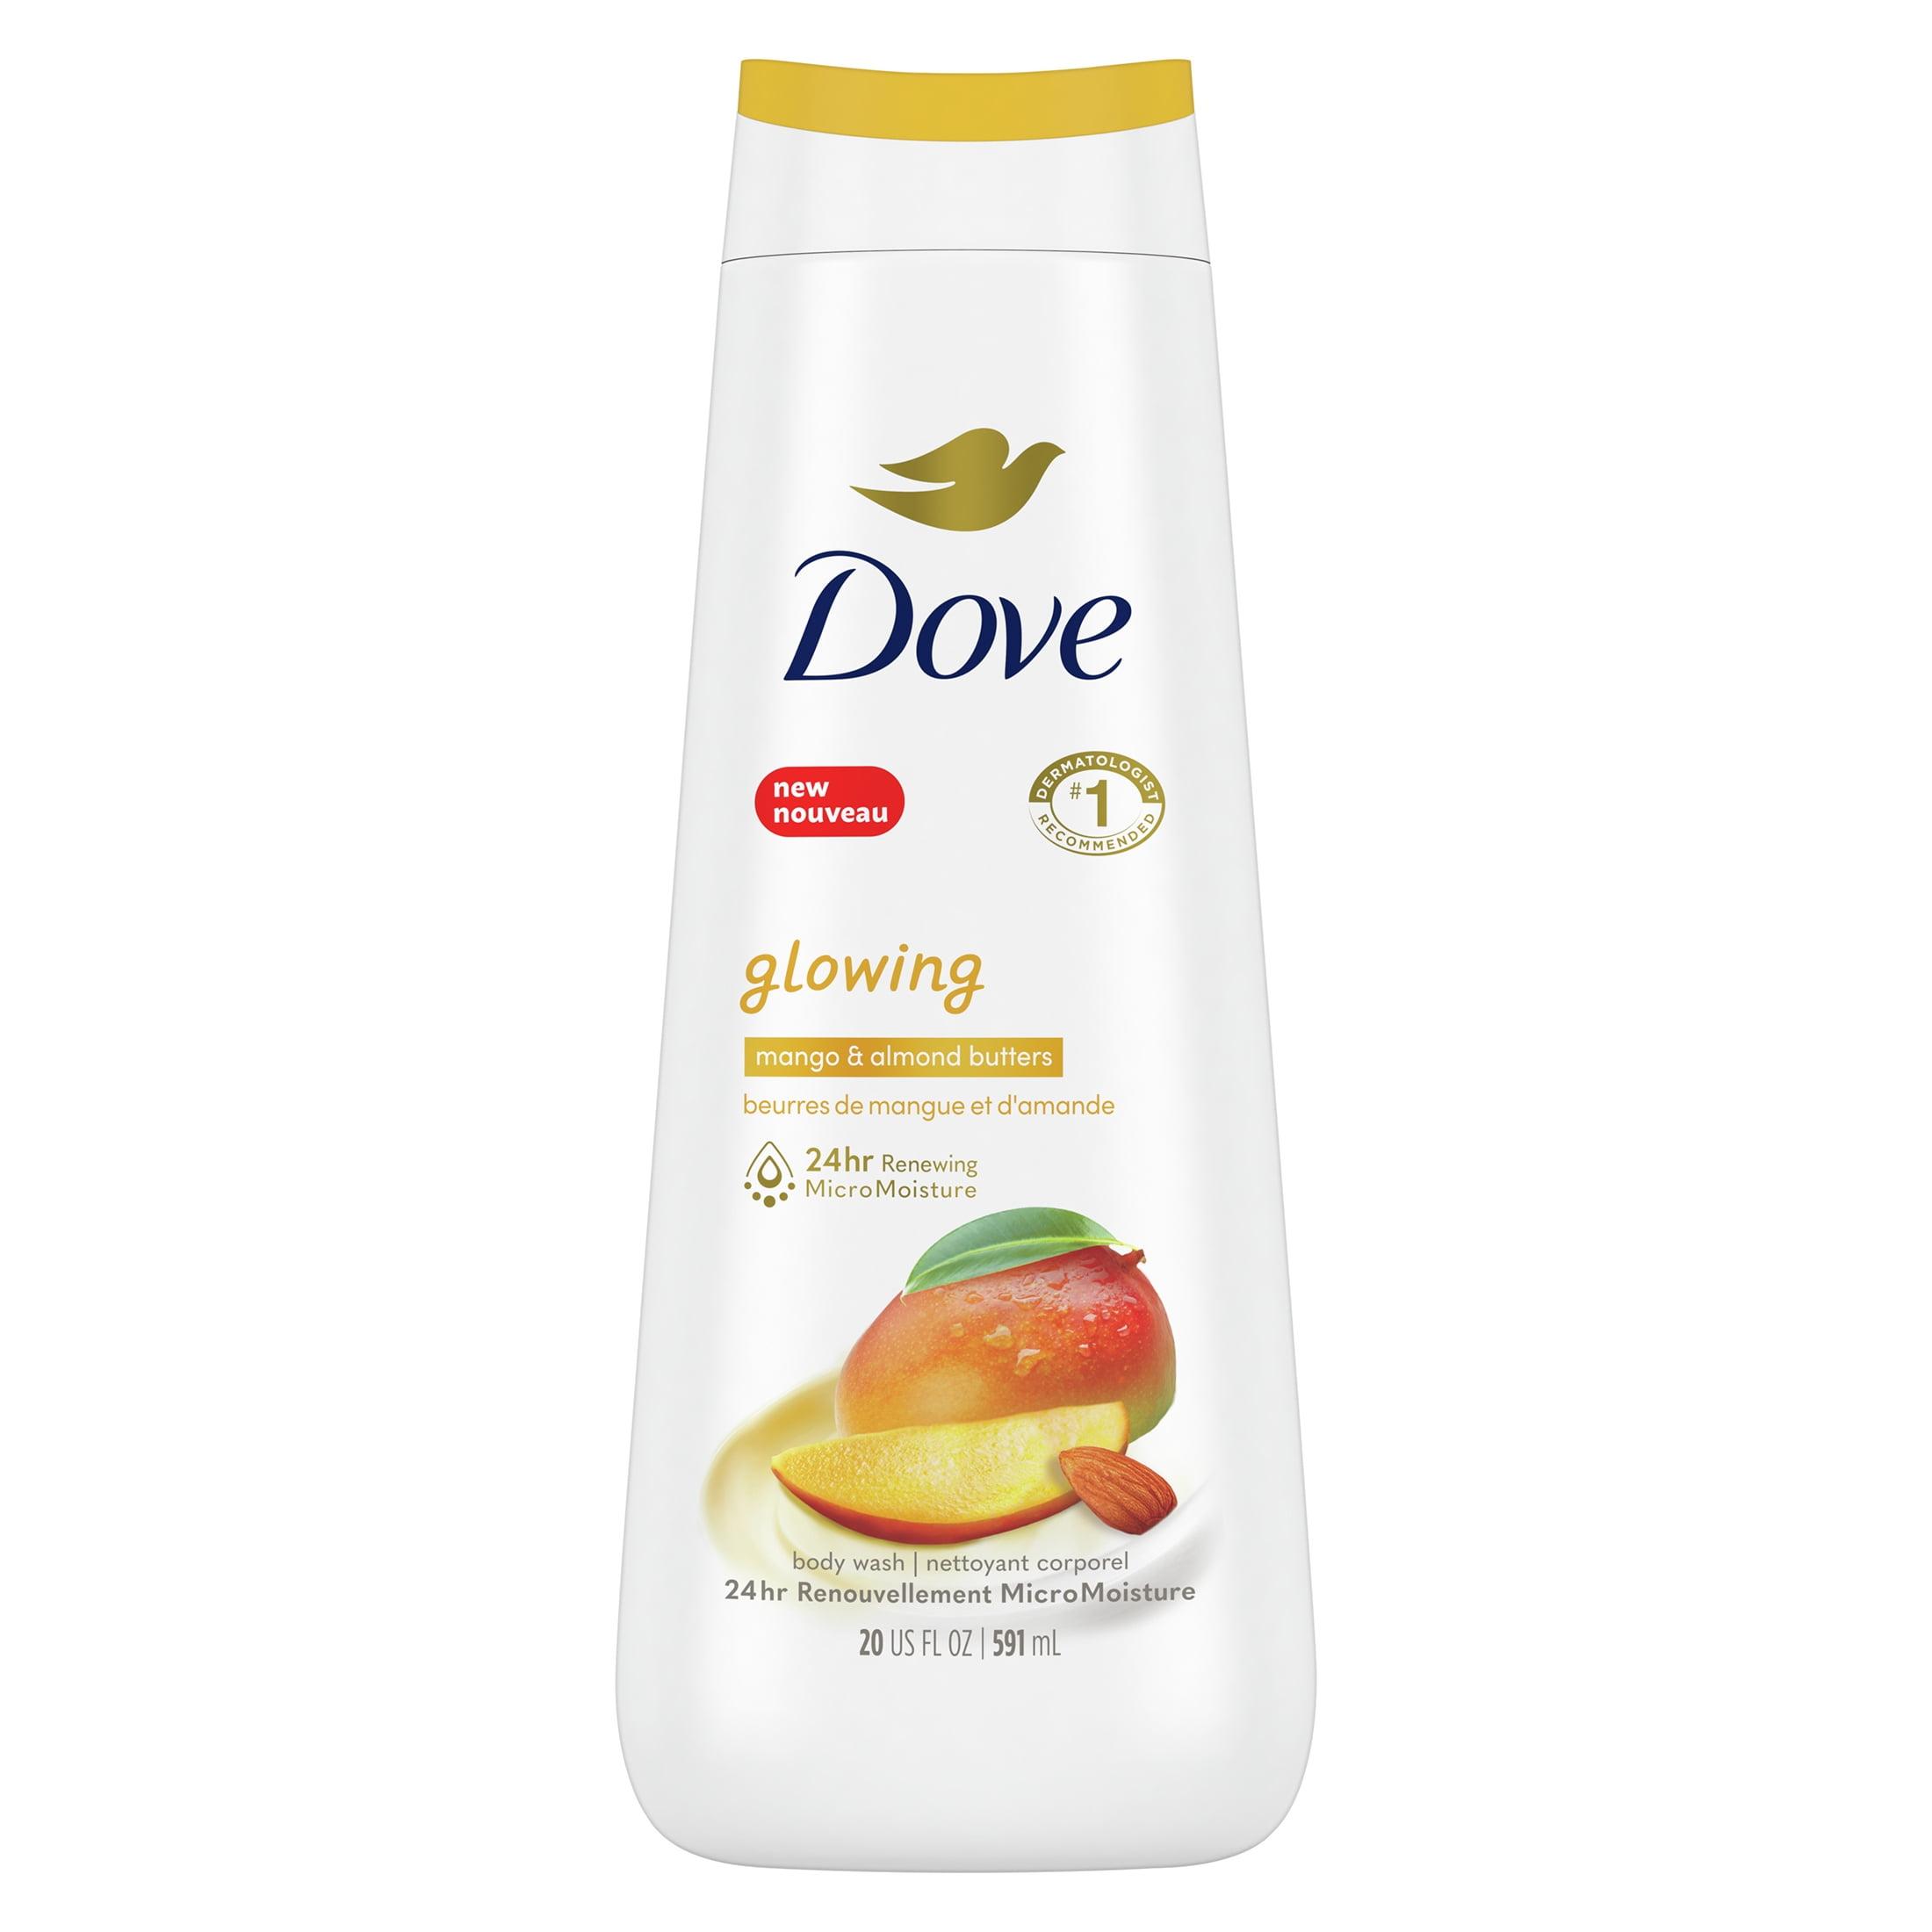 Dove Glowing Long Lasting Gentle Women's Body Wash All Skin Type, Mango and Almond Butter, 20 fl oz - image 1 of 11